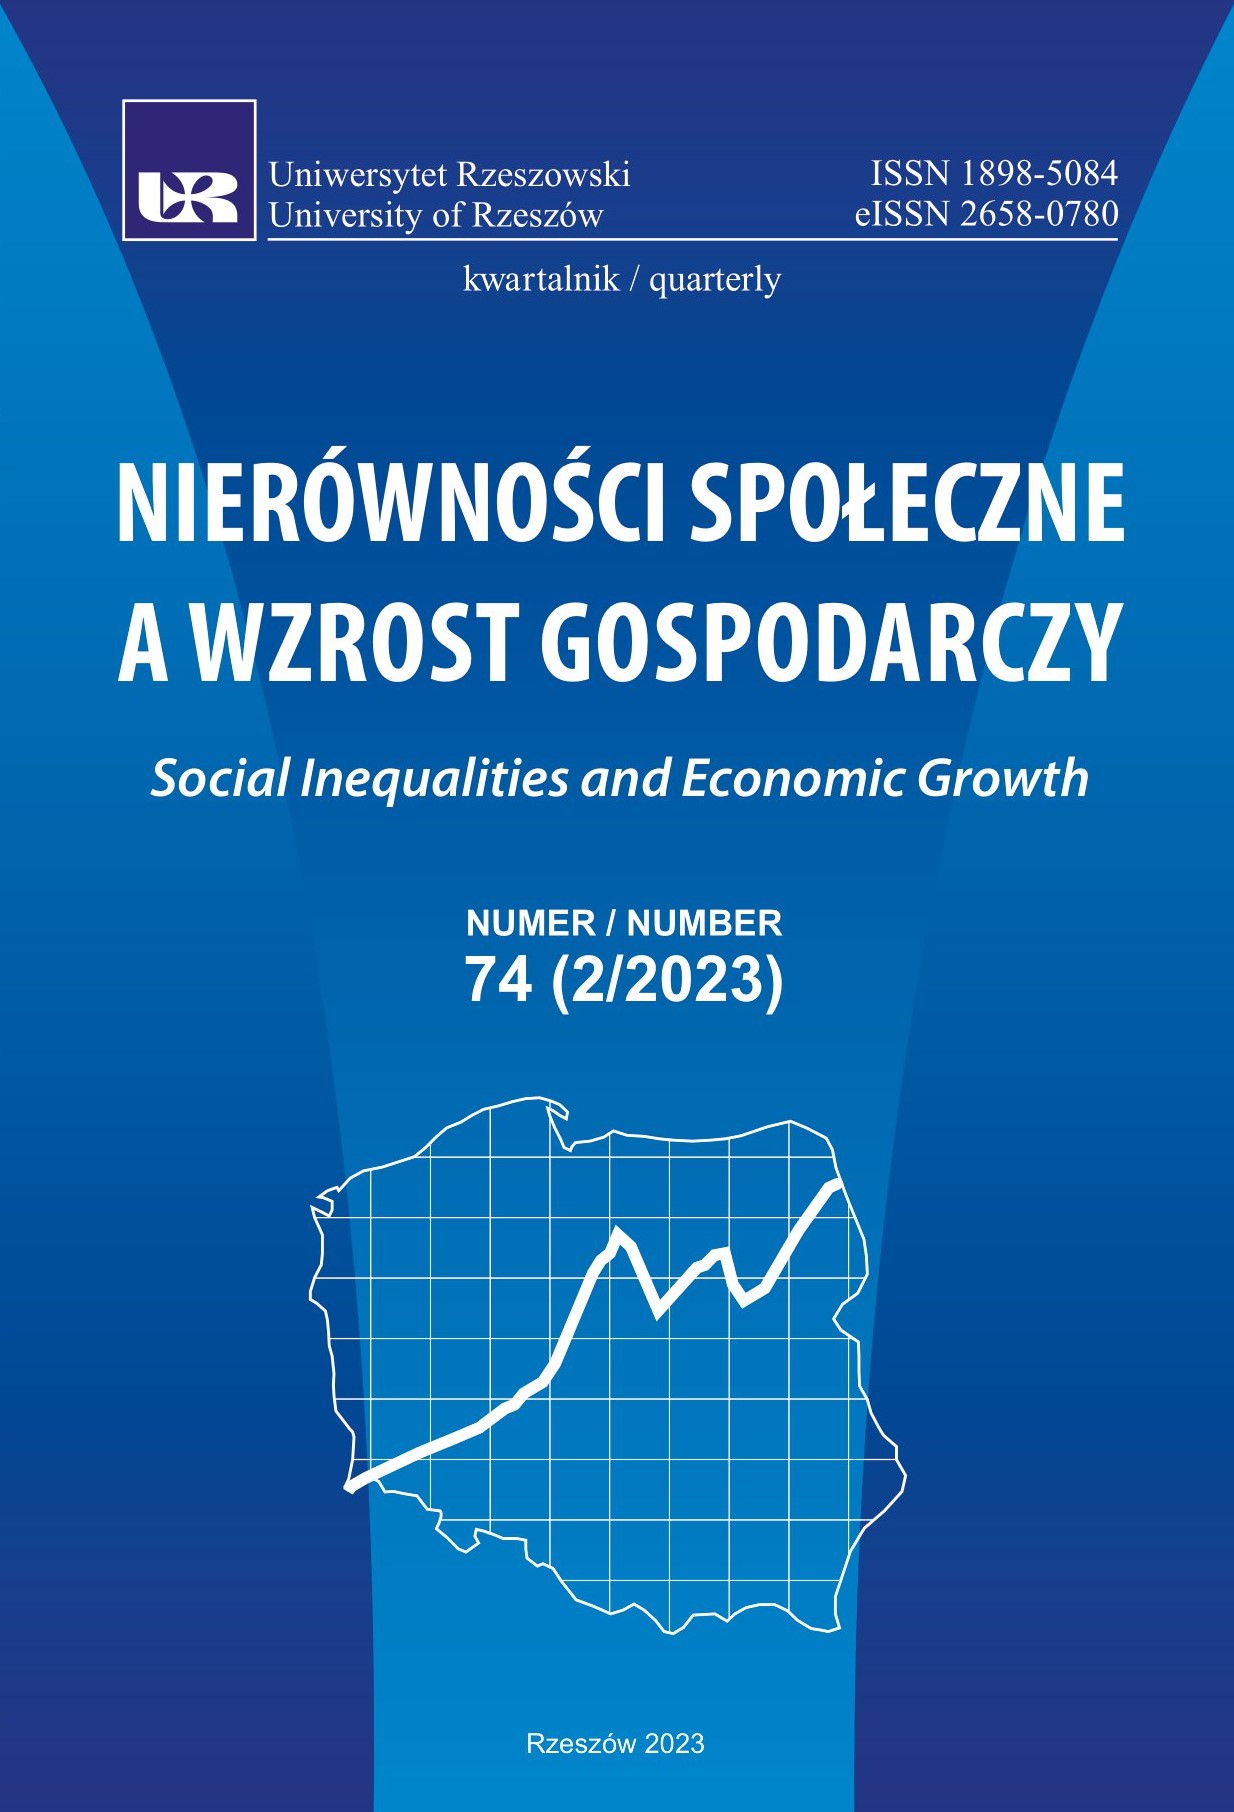 Determinants of electoral success and evaluation of the government of Prawo
i Sprawiedliwość [Law and Justice] Party by the inhabitants of Podkarpackie Cover Image